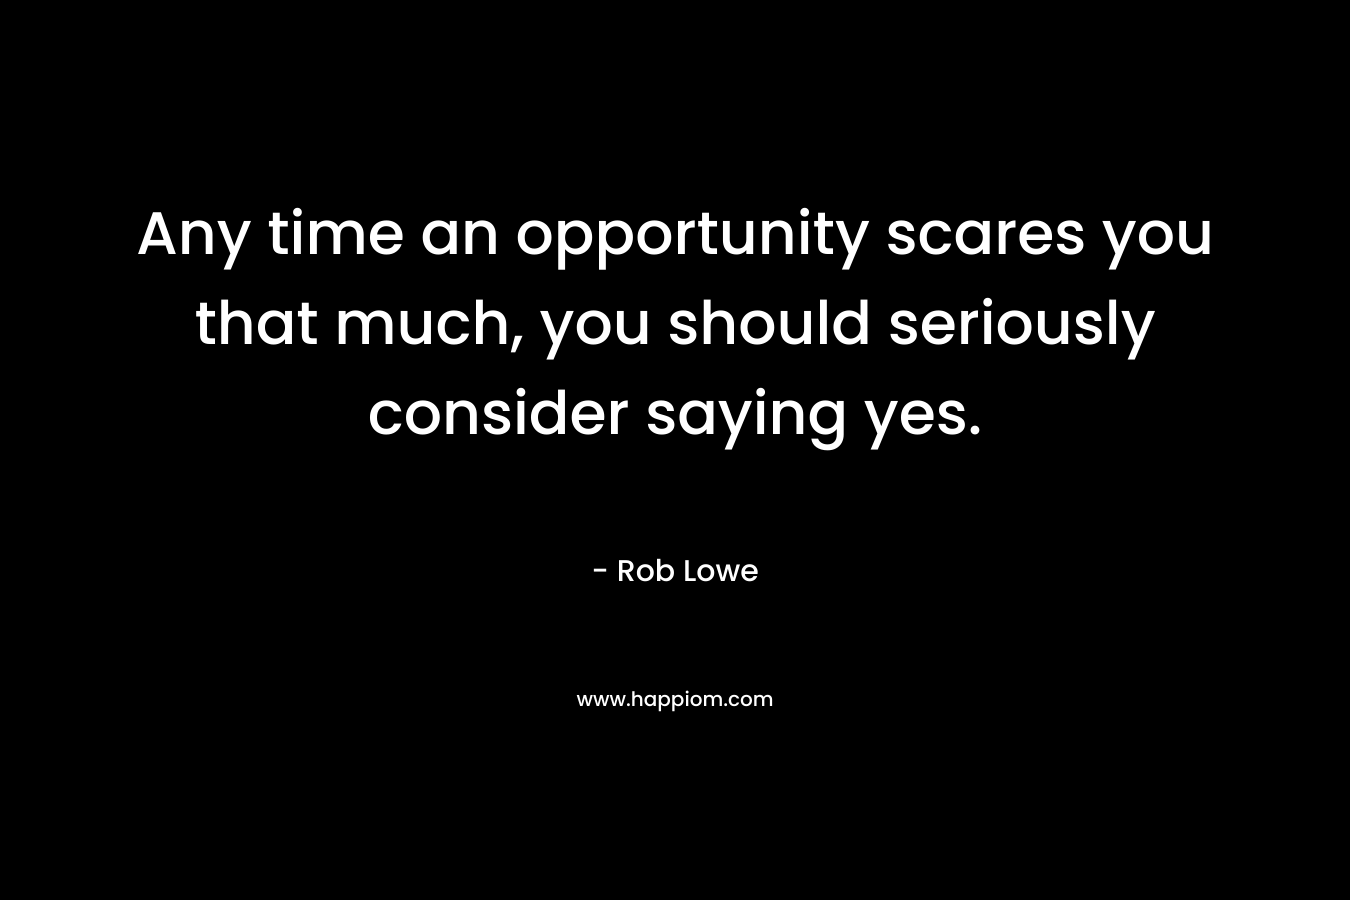 Any time an opportunity scares you that much, you should seriously consider saying yes.